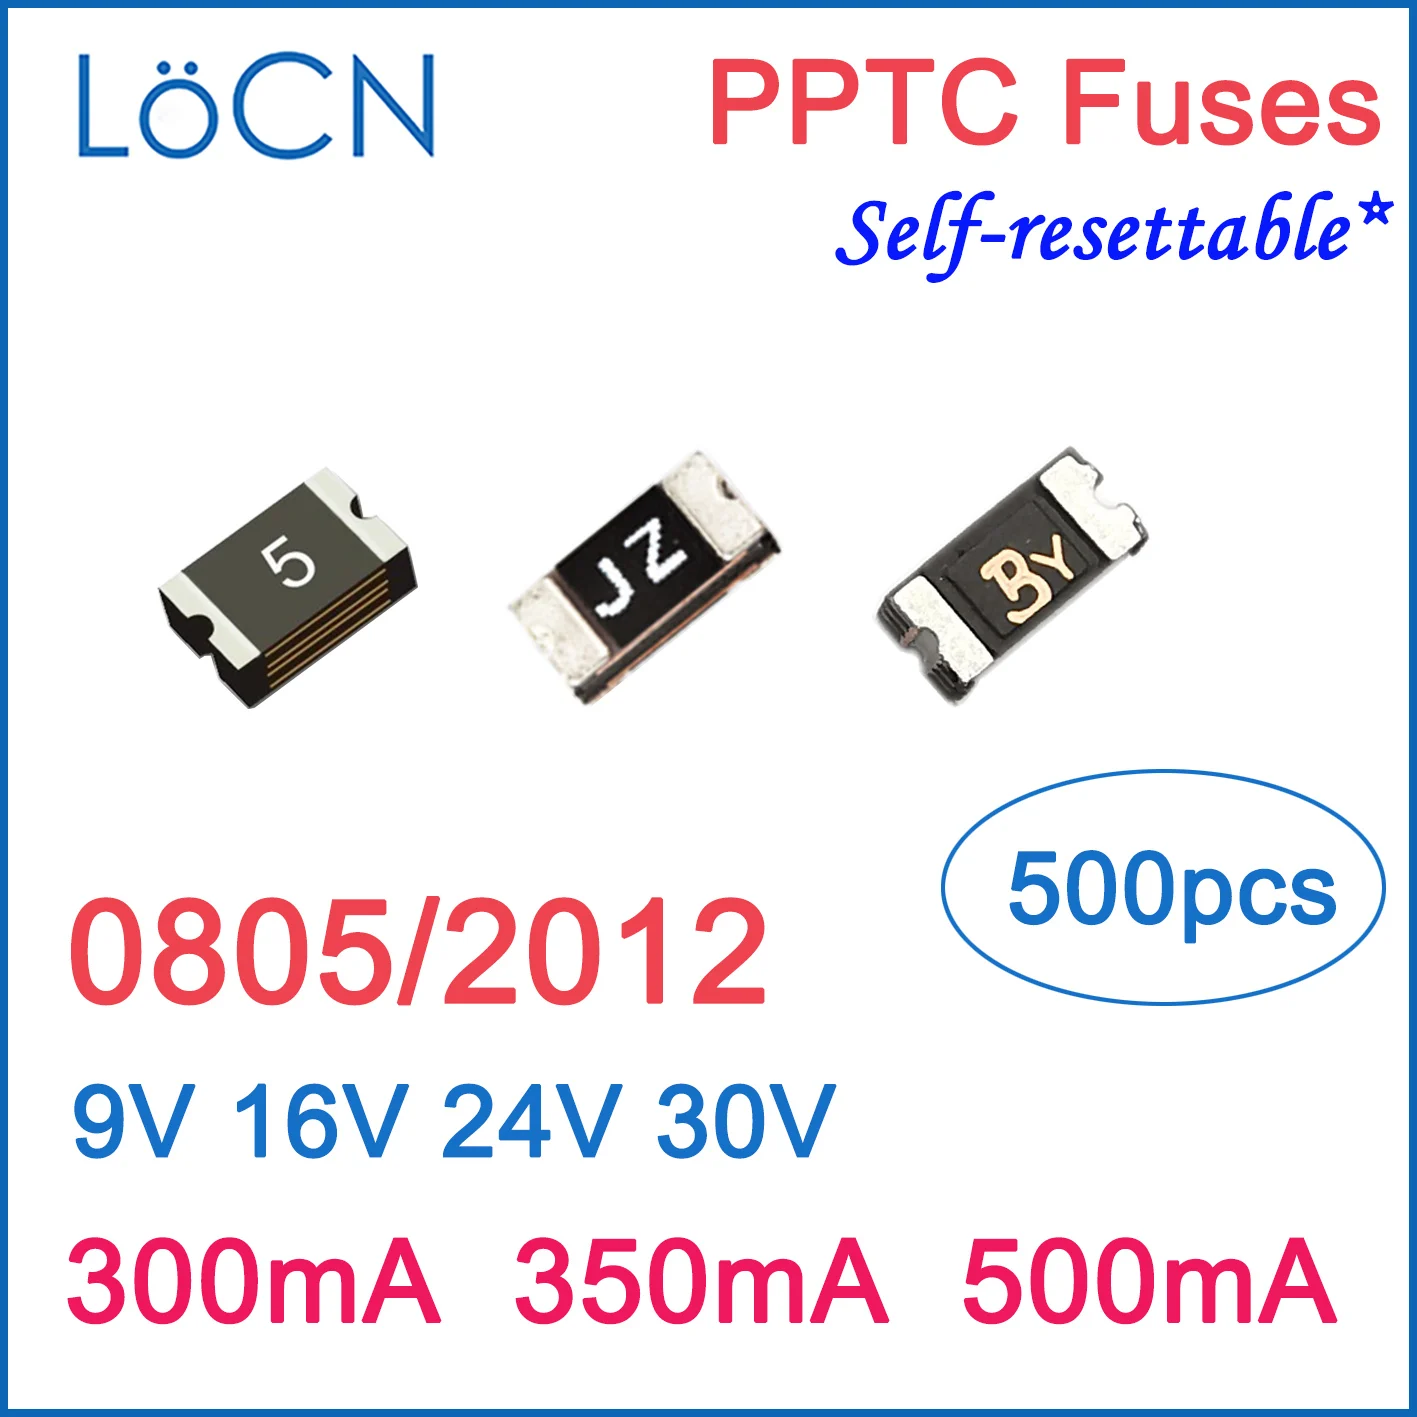 

Fuses PPTC 0805 2012 300mA 350mA 500mA 0.3A 0.35A 0.5A 9V 16v 24v 30v SMD self Resettable Made in china high quality 500pcs